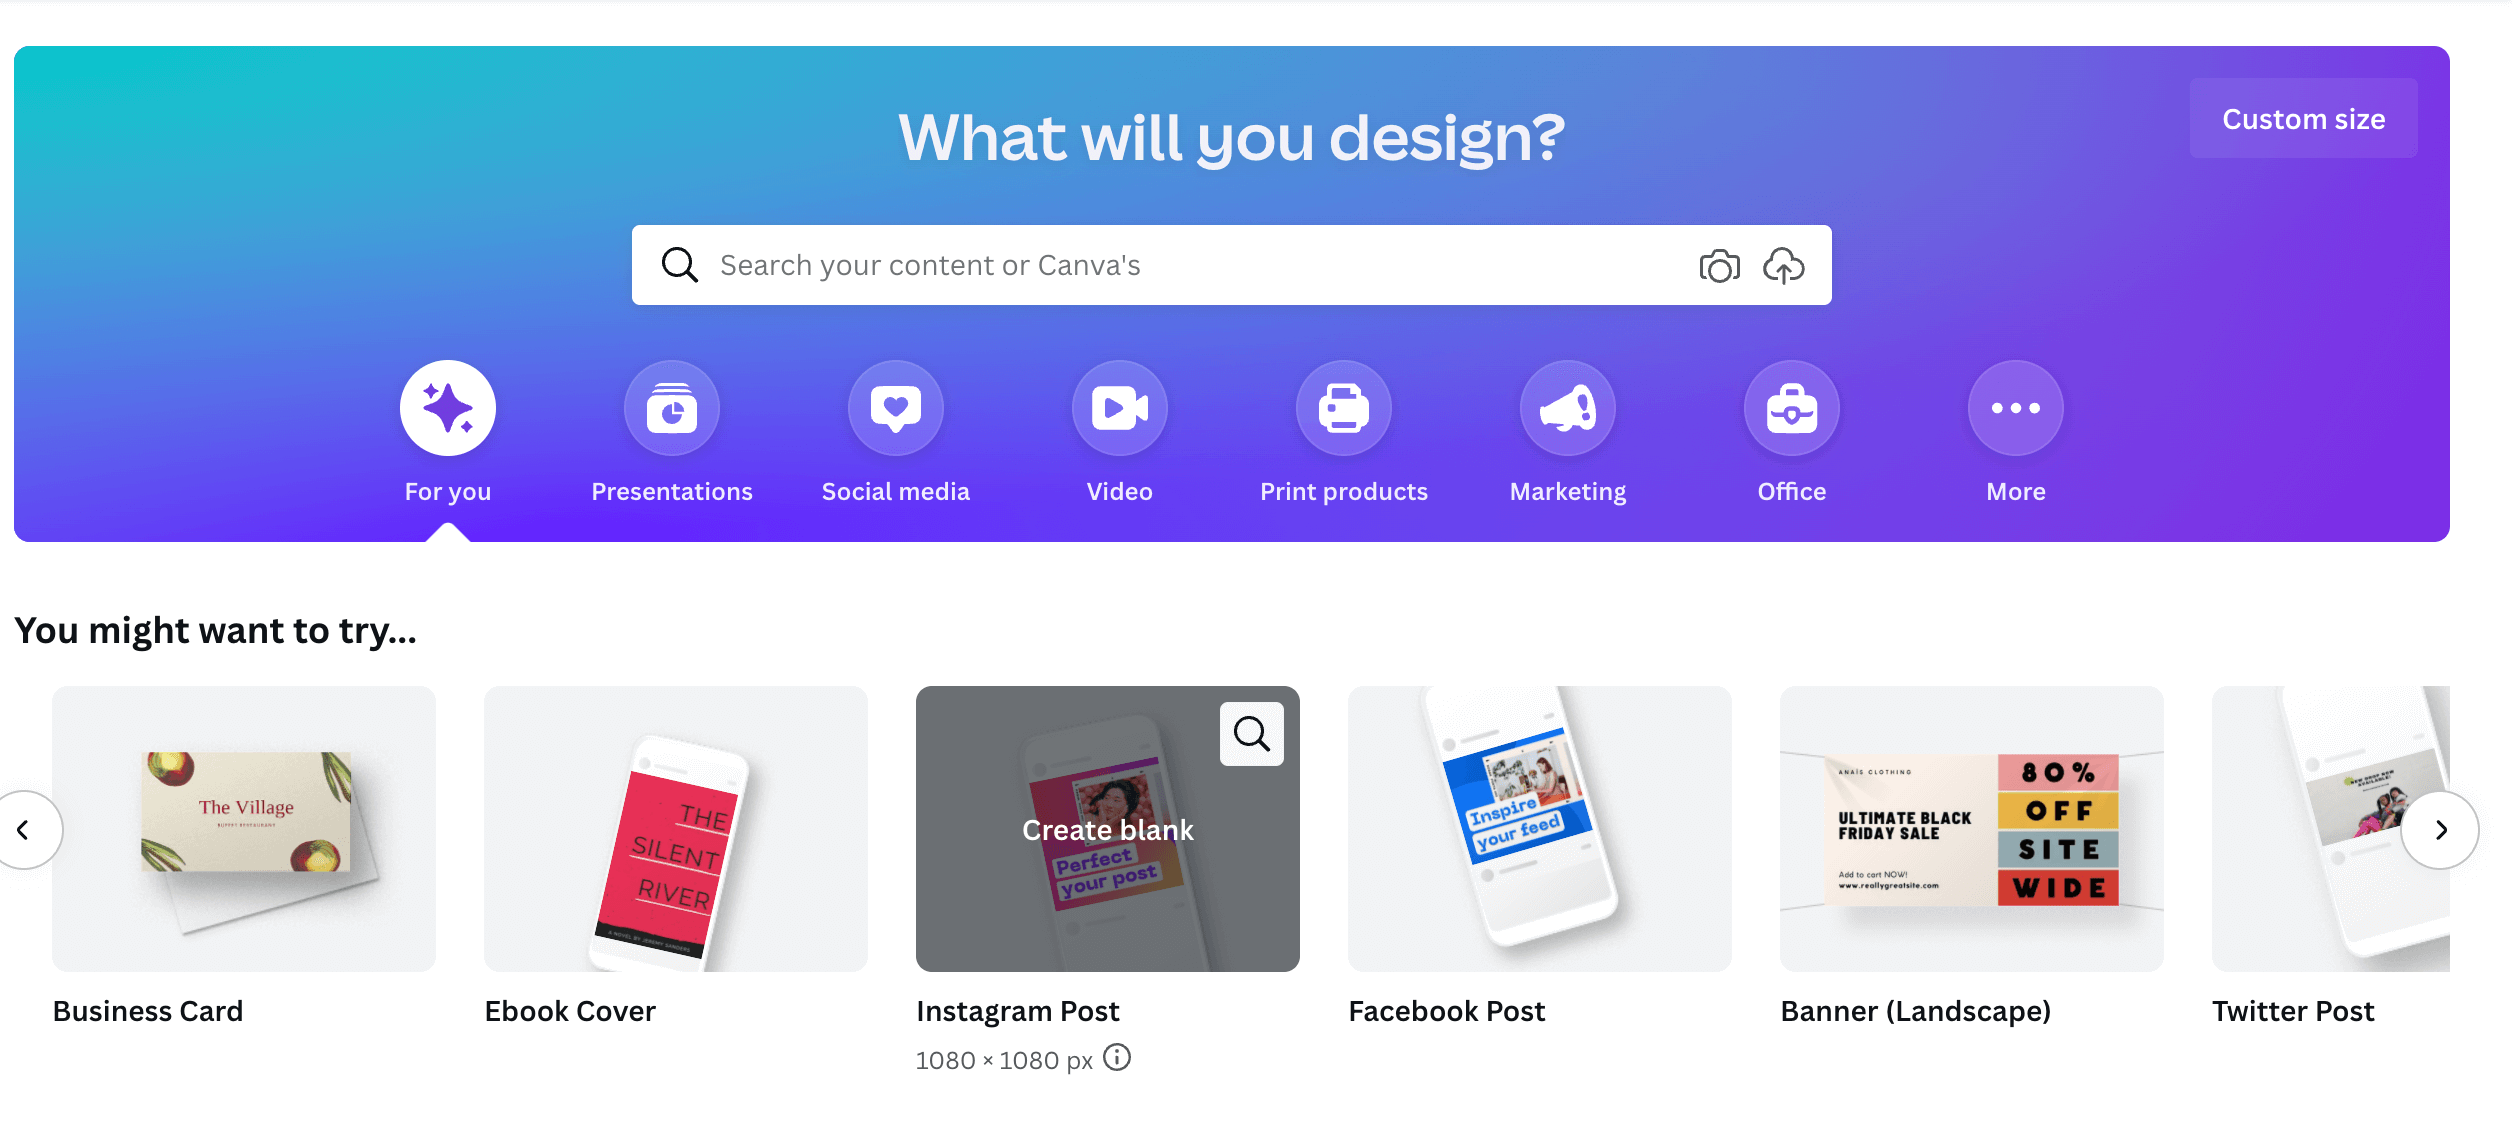 The search bar and category suggestions on Canva's homepage